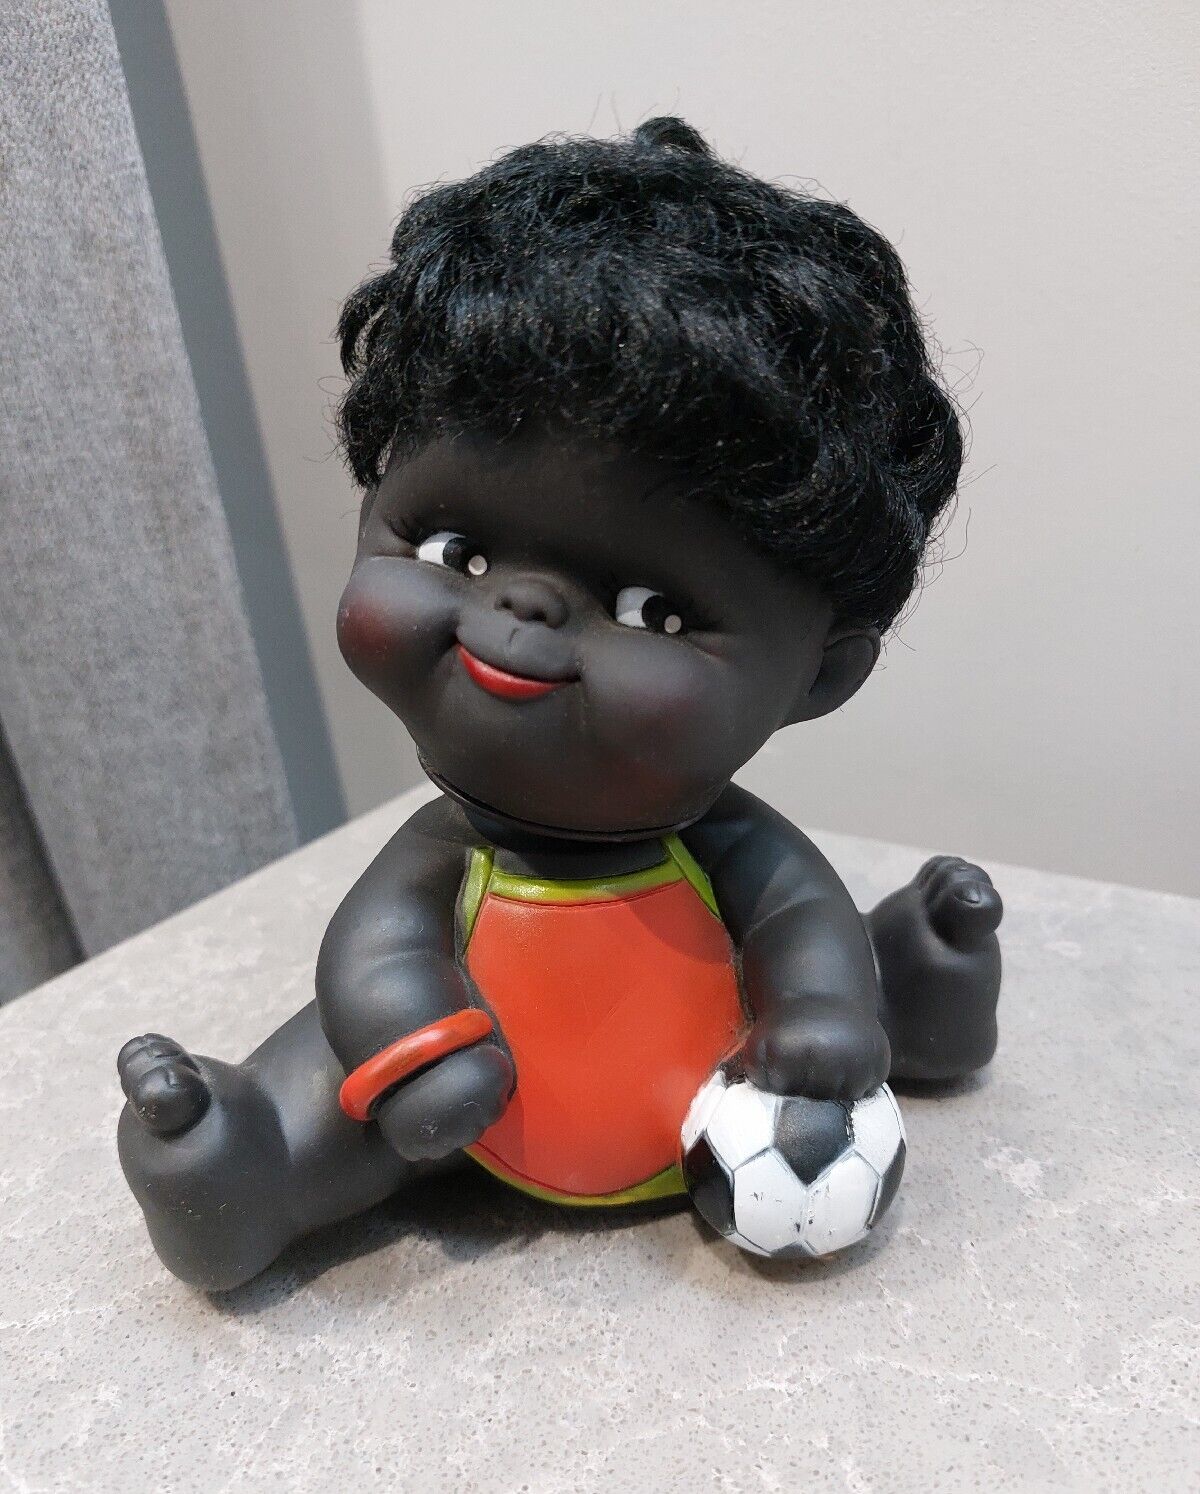 Vintage Rubber Toy Action Wind-up Doll Boy with Soccer Ball. Rare